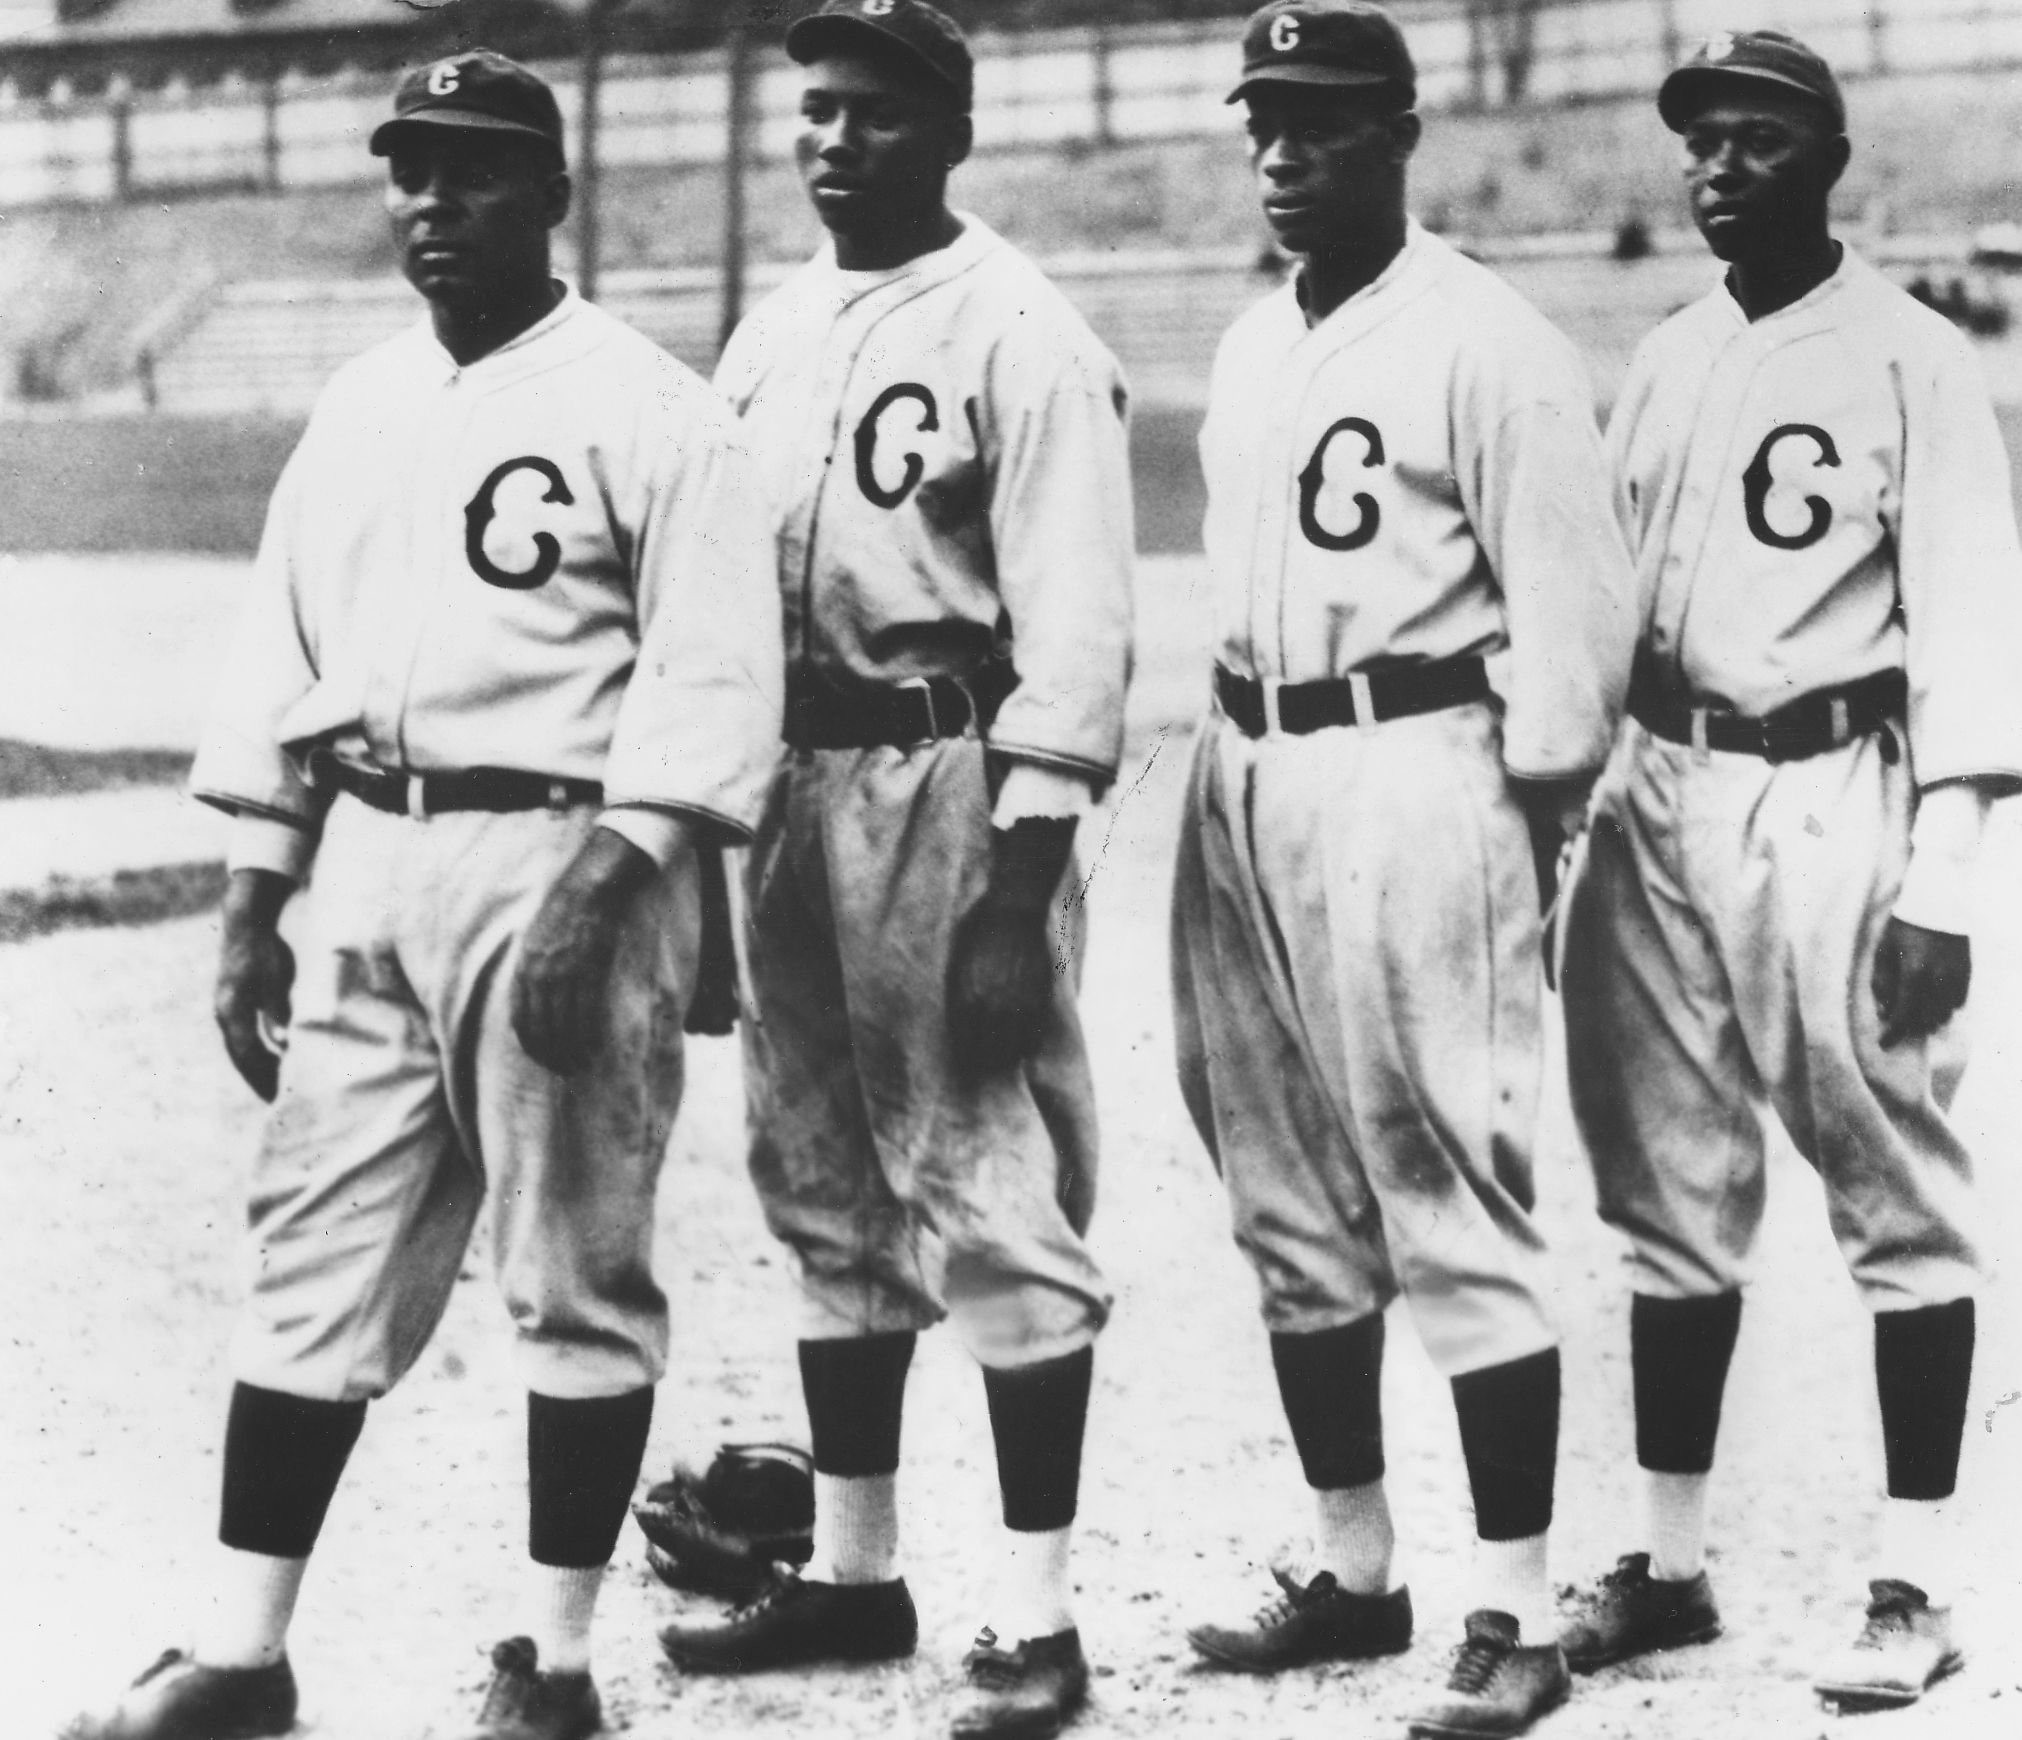 oscar charleston, josh gibson, ted page and william “judy” johnson pose for a photo in nineteen fourty.